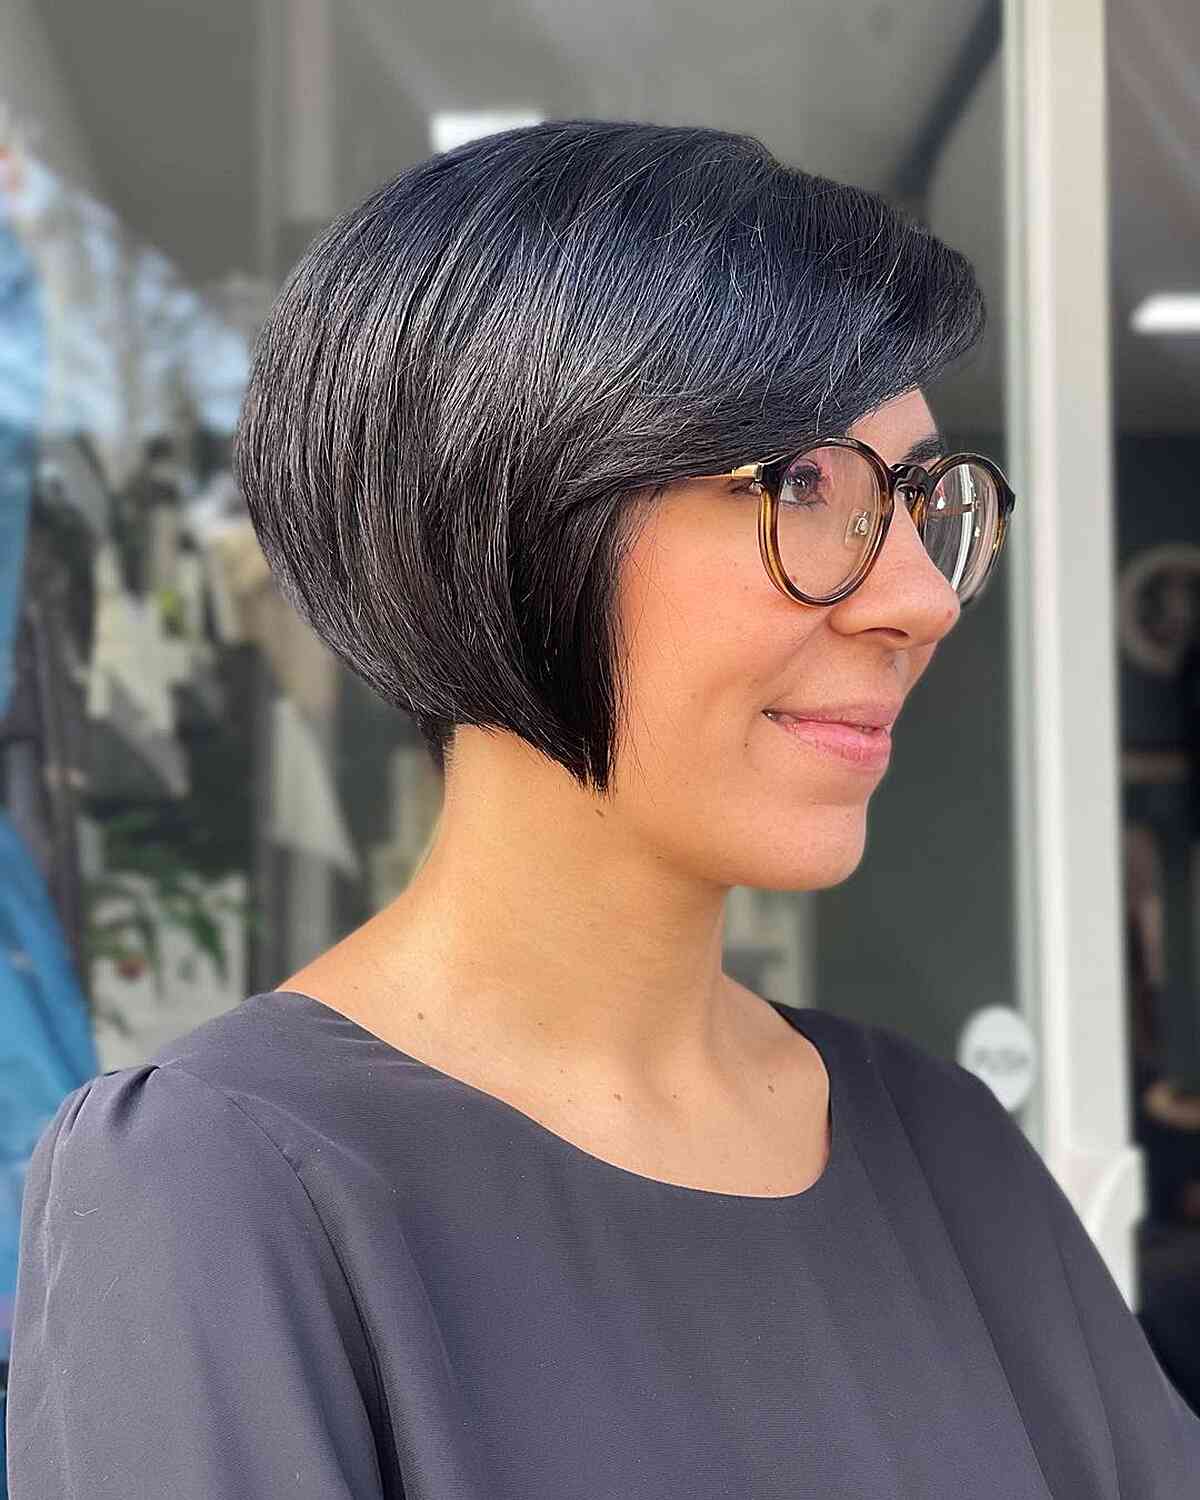 Short Black Round Bob with Side-Swept Bangs for Women Wearing Glasses